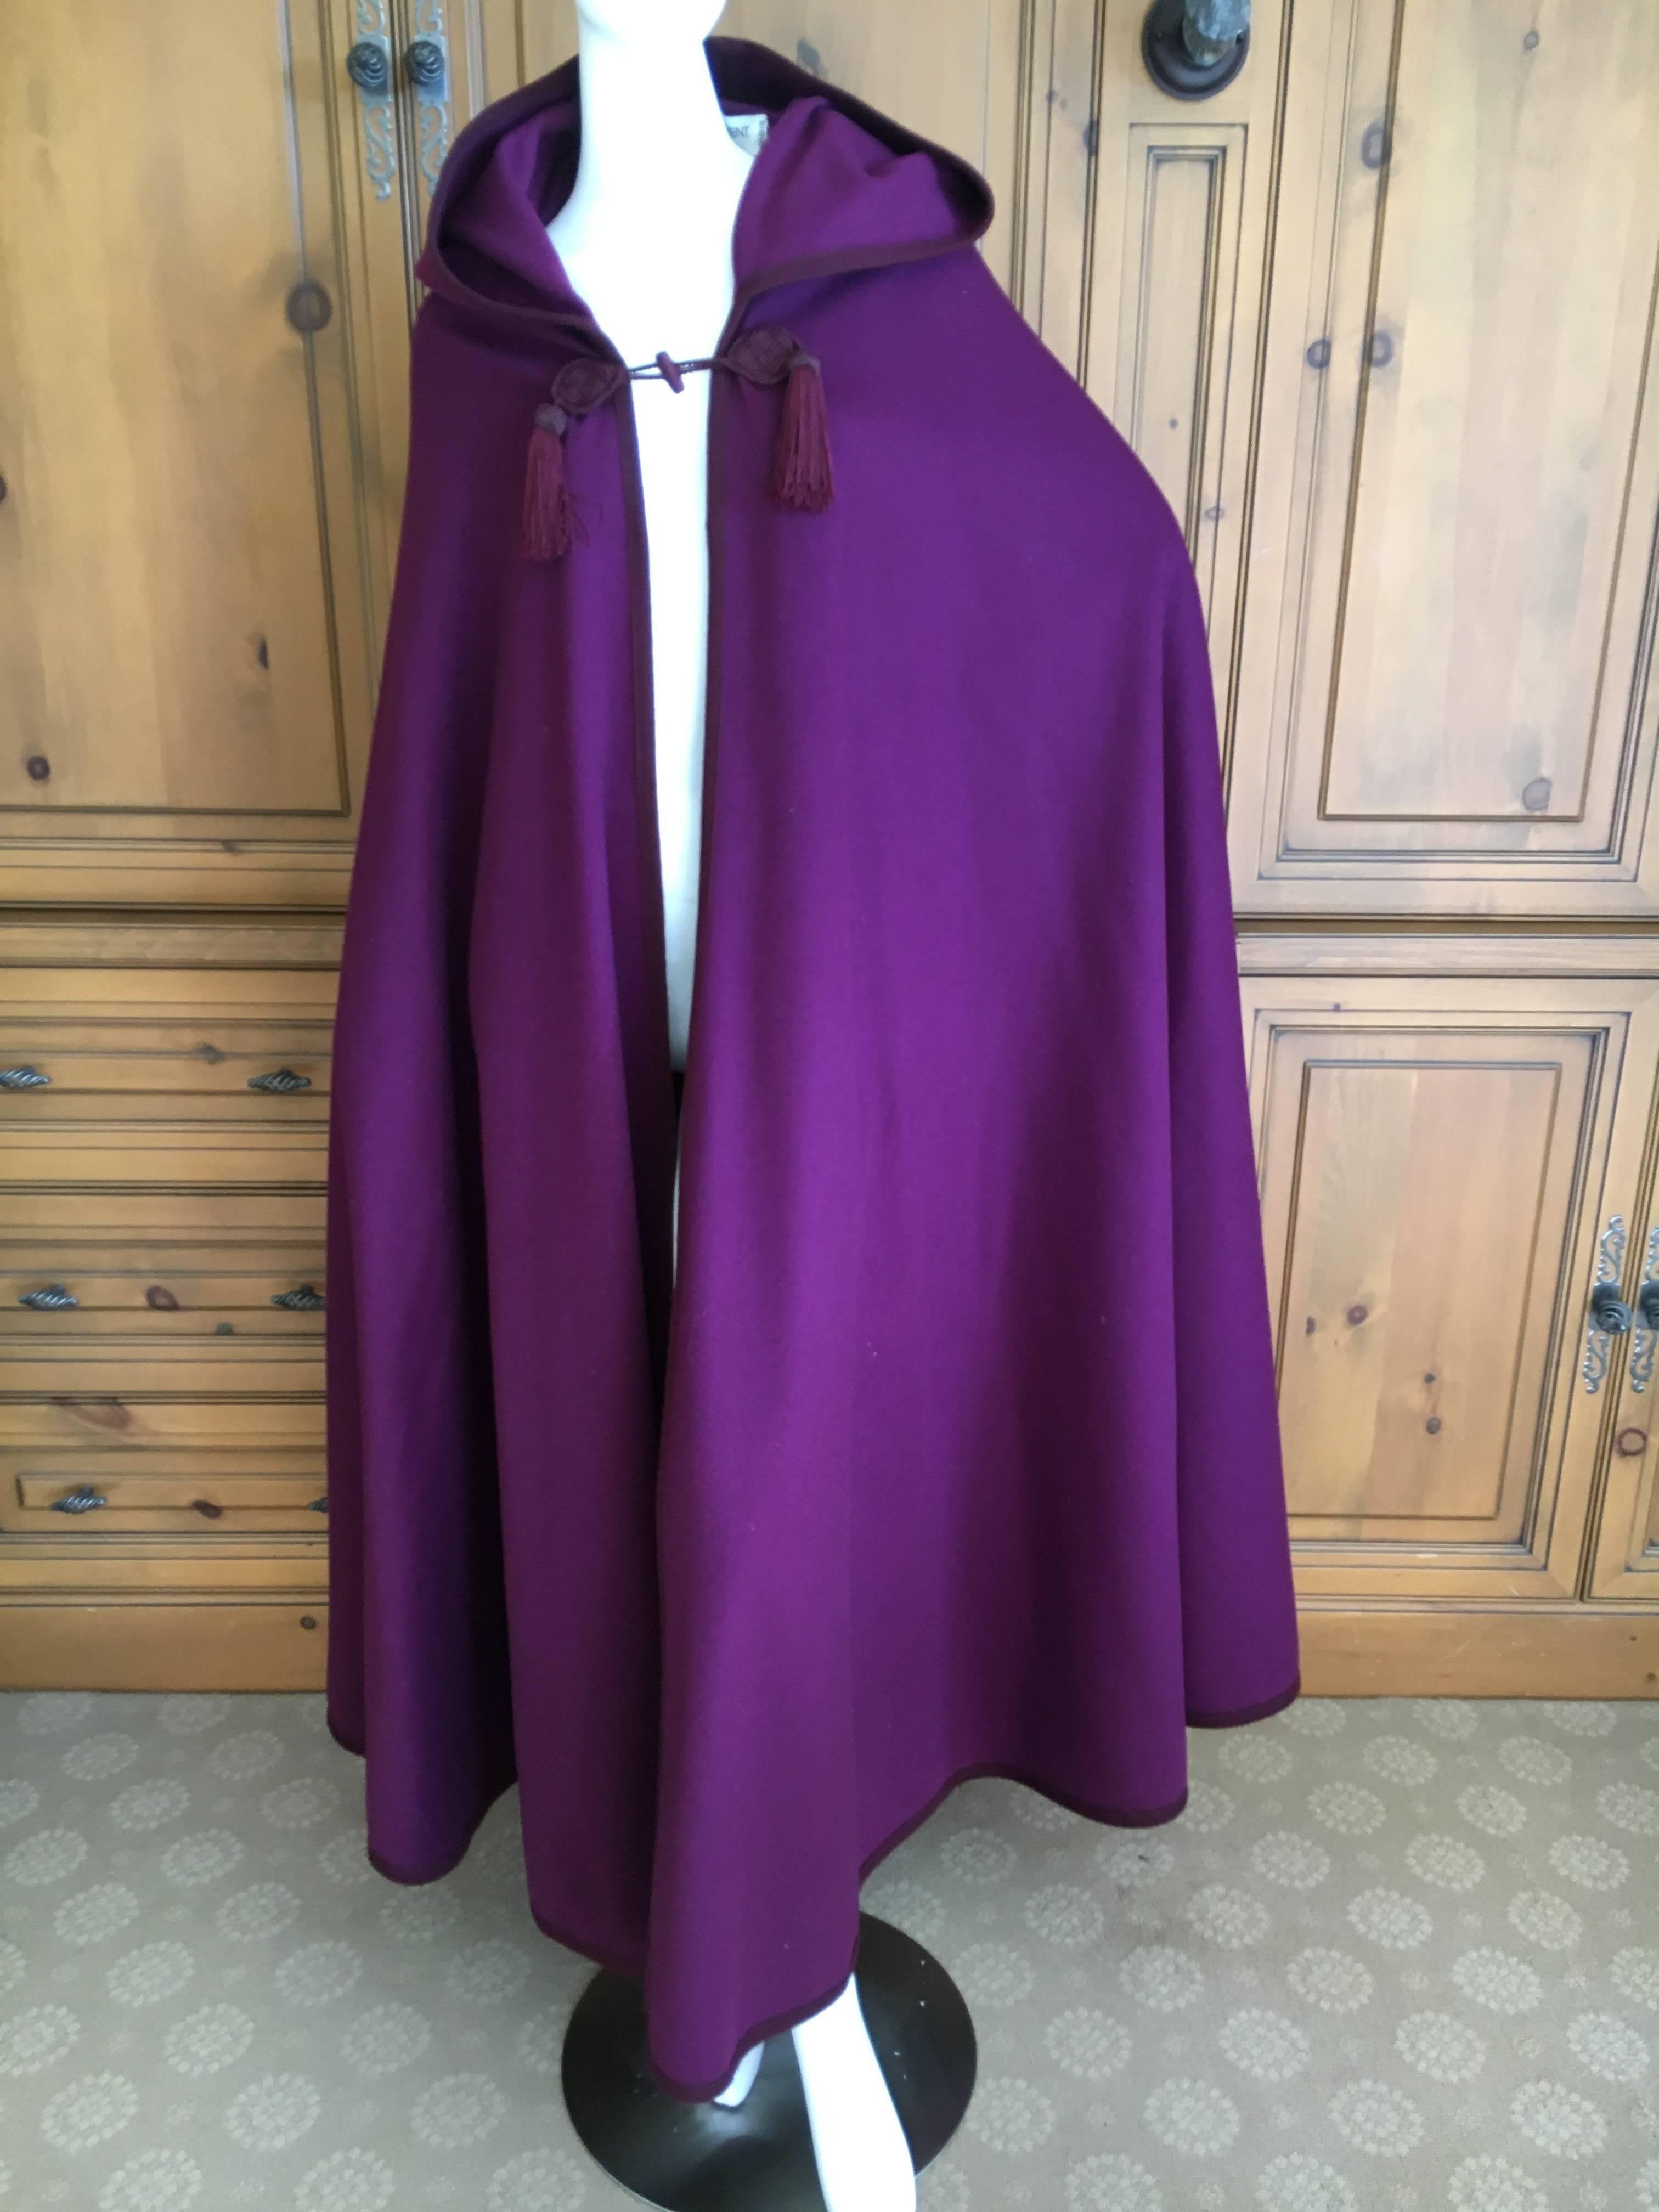 Yves Saint Laurent Rive Gauche Purple Cape with Hood and Tassels.
Of all the Capes YSL designed, this one is the best. WIth sutache and double tassels on the front, hooded with a long tassel down the back.
Rare to find in this color.
In excellent